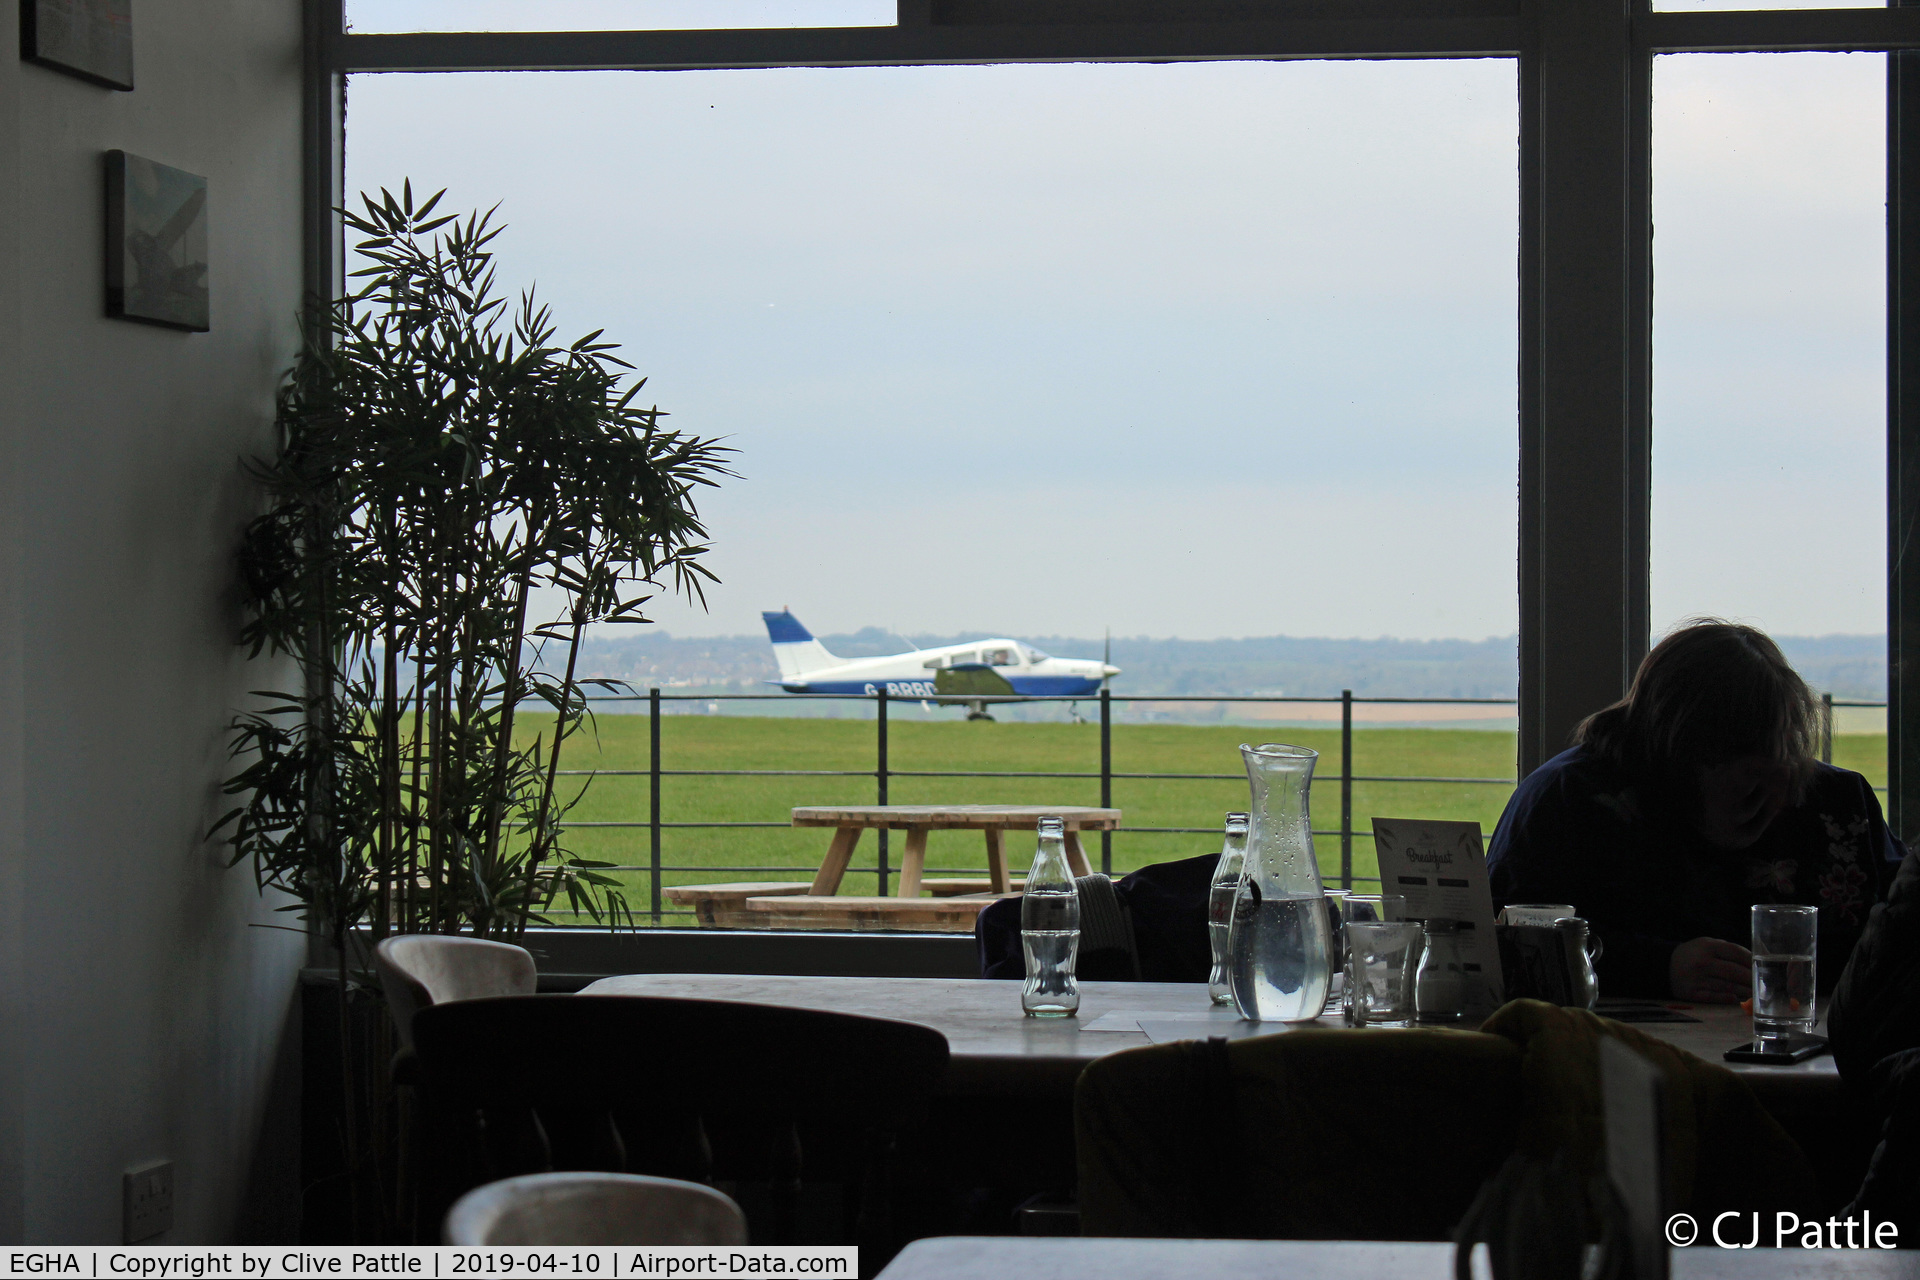 Compton Abbas Airfield Airport, Shaftesbury, England United Kingdom (EGHA) - Nice cafe with full views of the airfield activities